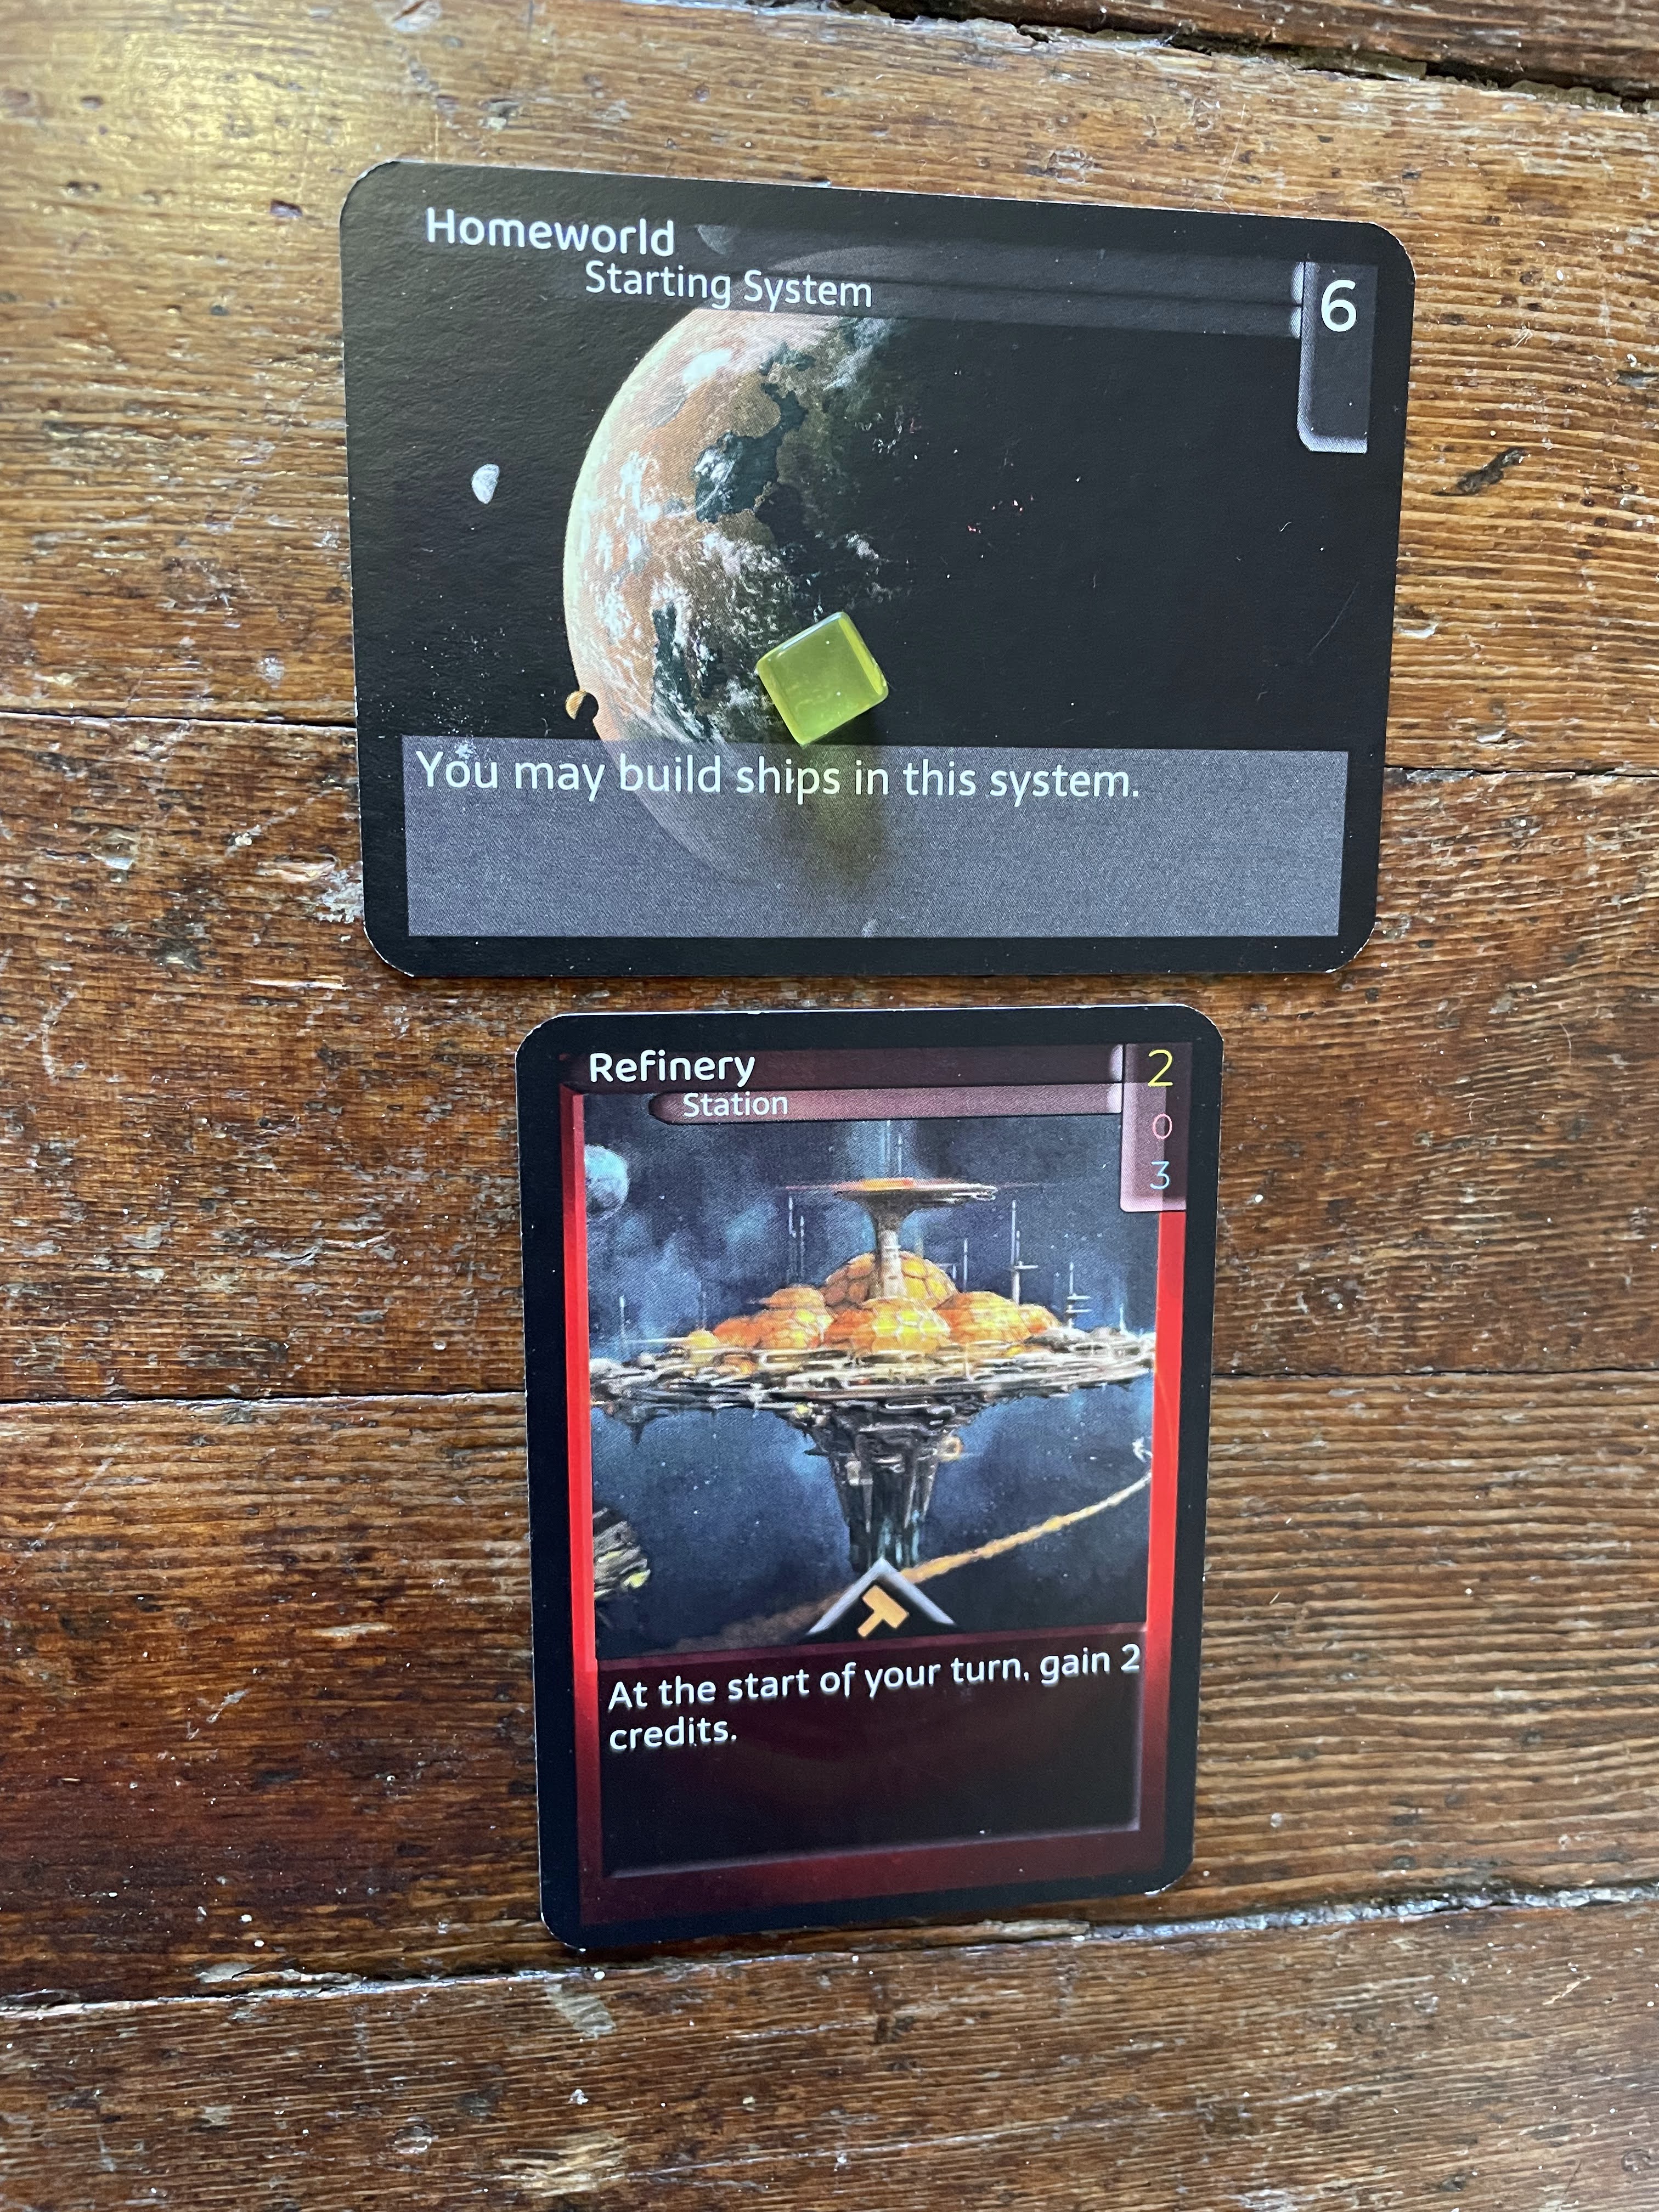 A Homeworld card, with a yellow counter on it, and a Refinery station card placed beneath it.